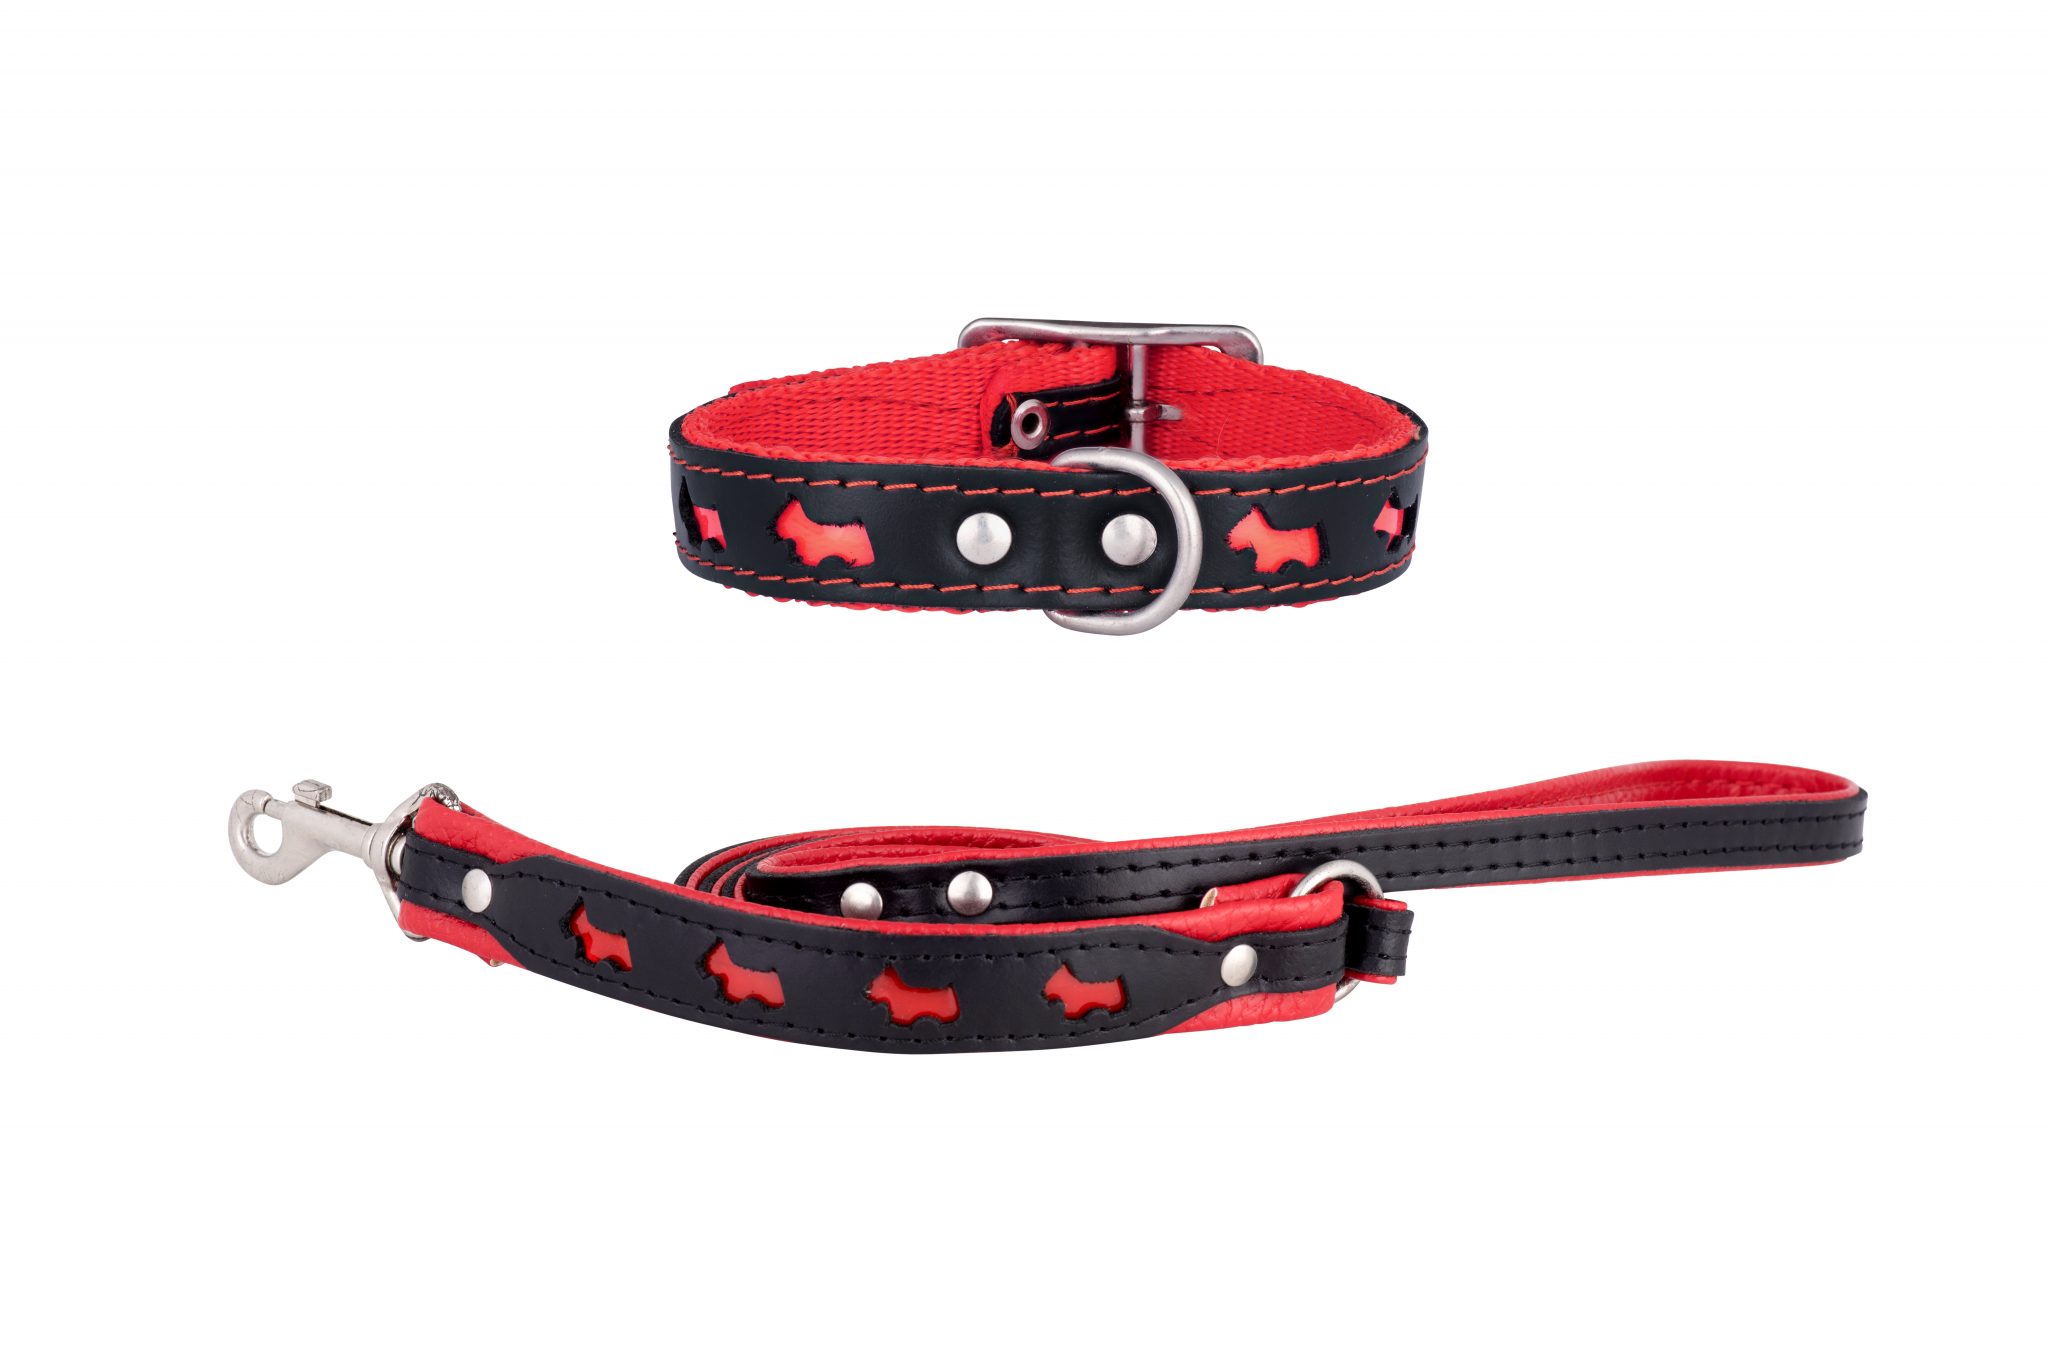 REFLEX Leather Designer Dog Collar and Lead in Red